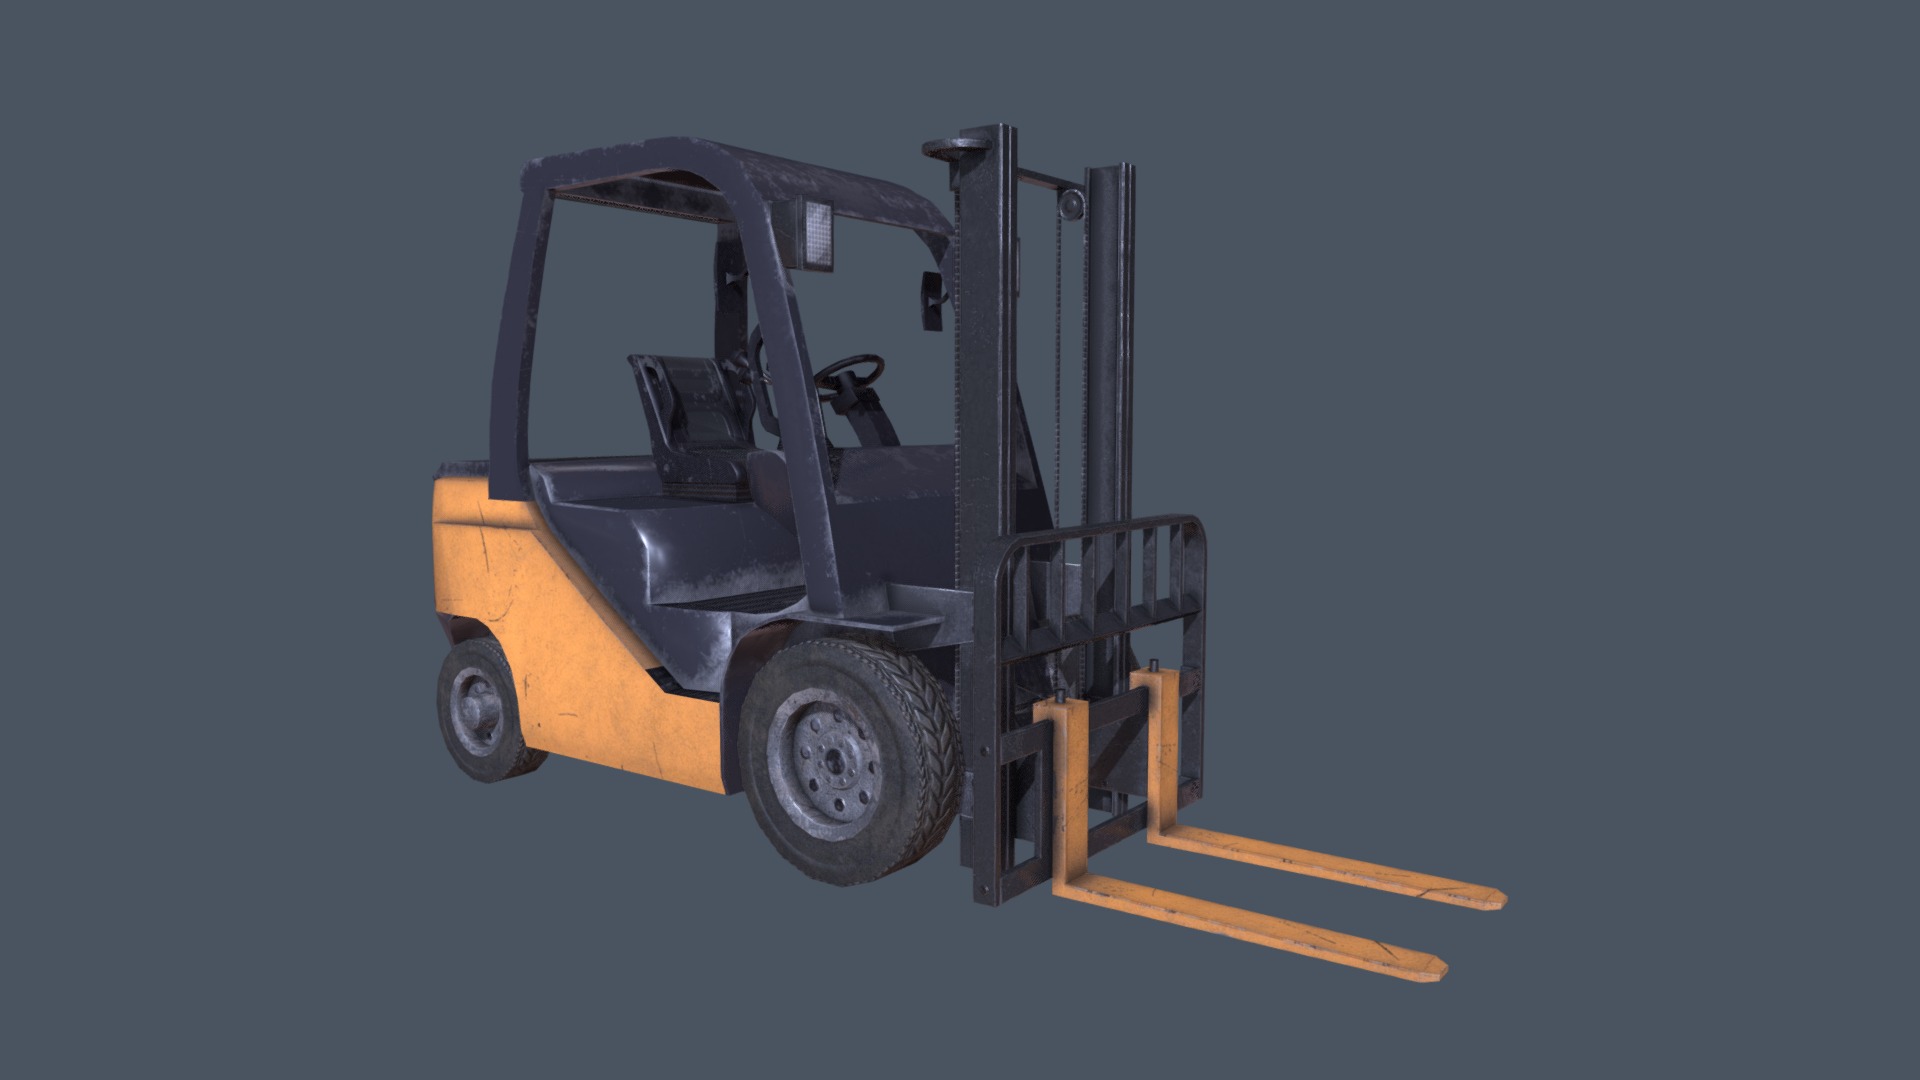 3D model Forklift PBR - This is a 3D model of the Forklift PBR. The 3D model is about a forklift on a blue background.